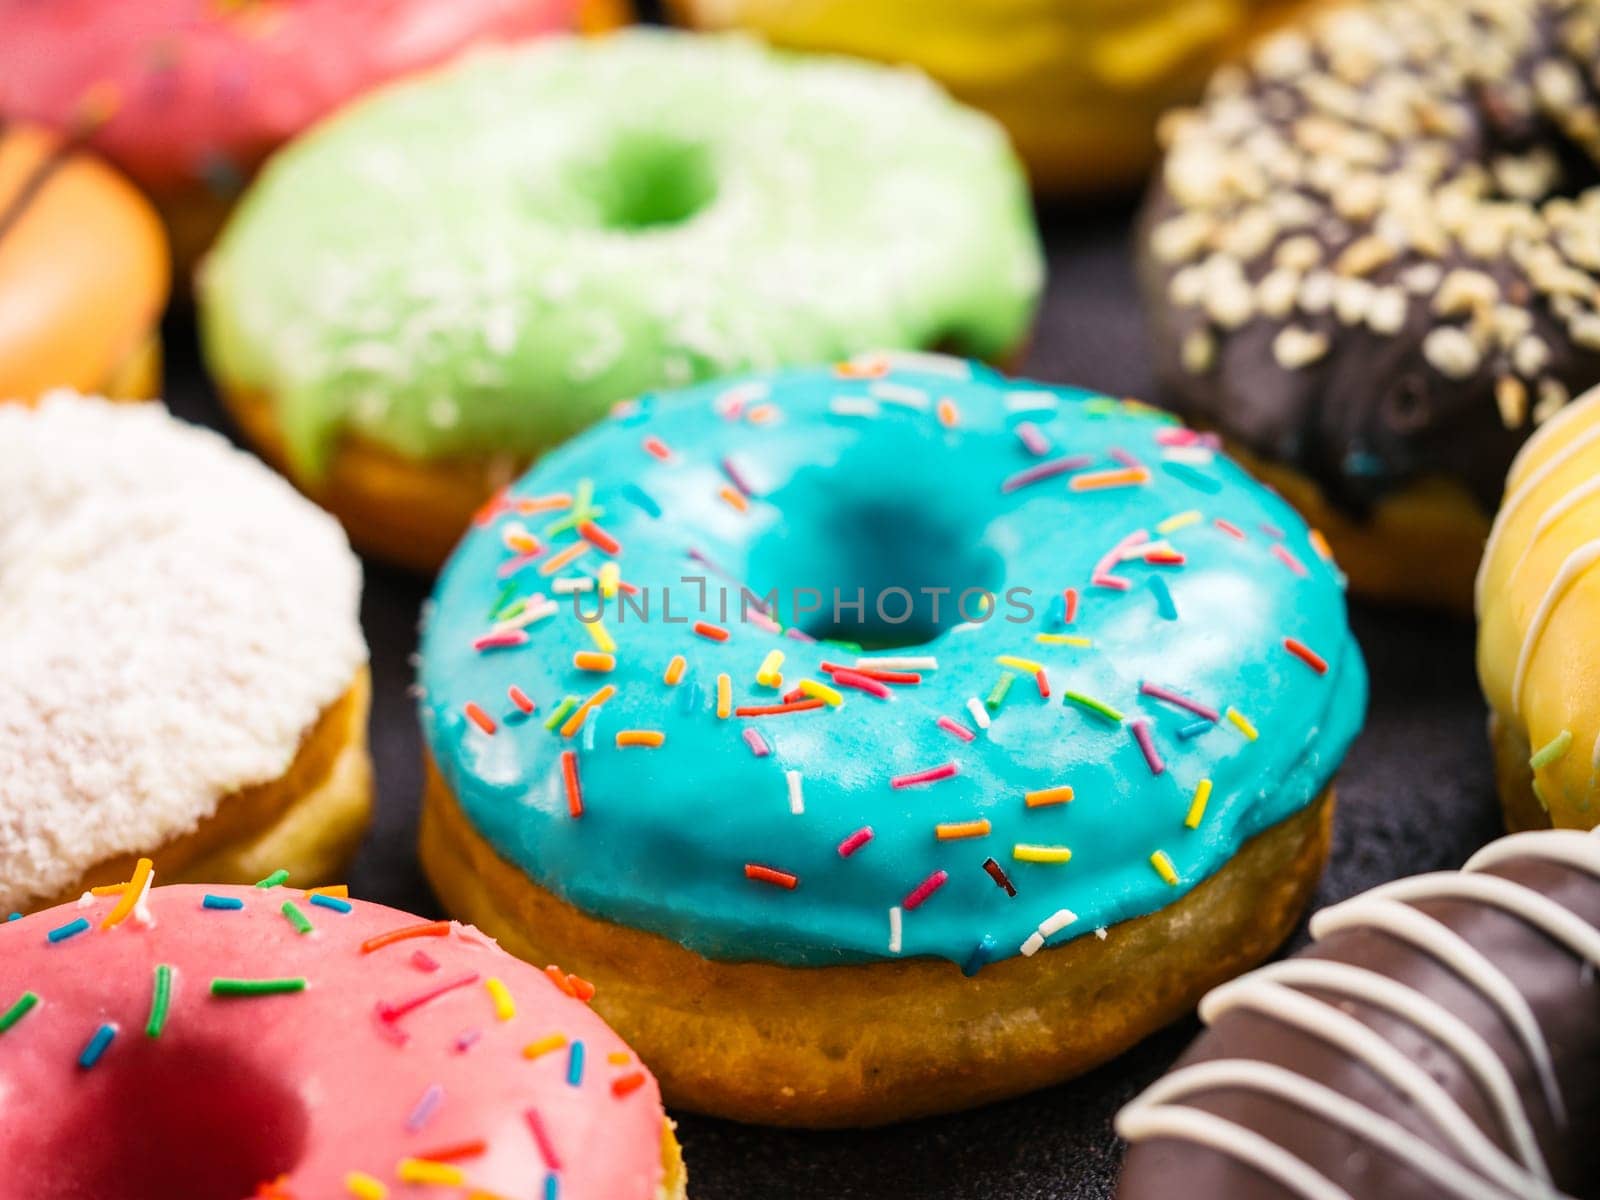 Close up view of assorted colorful donuts on dark background. Focus on blue glazed doughnut with sprinkles. Shallow DOF,